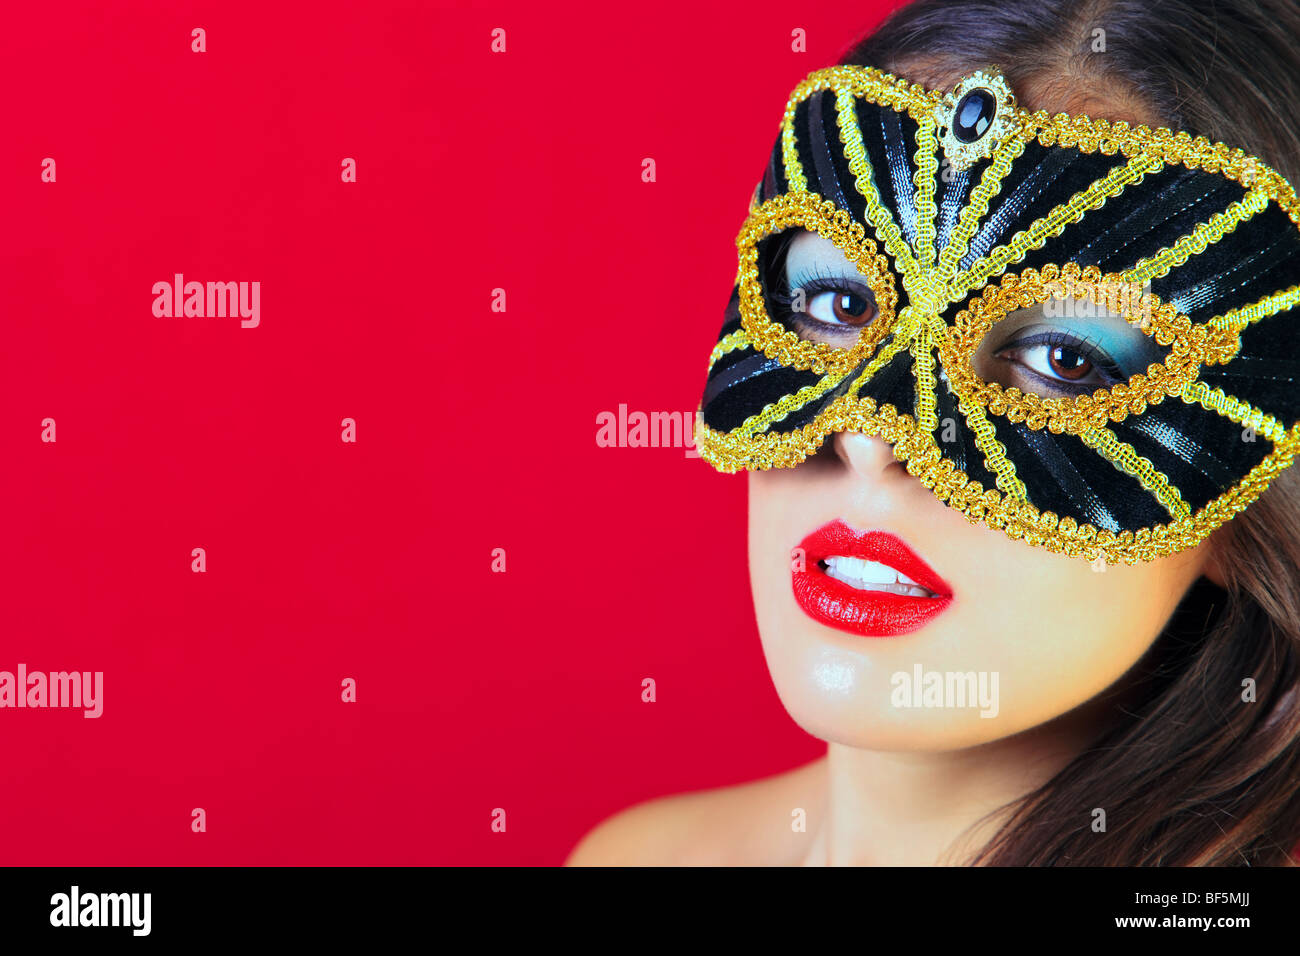 Beautiful brunette woman wearing a black and gold masquerade mask and bright red lipstick against a red background. Stock Photo